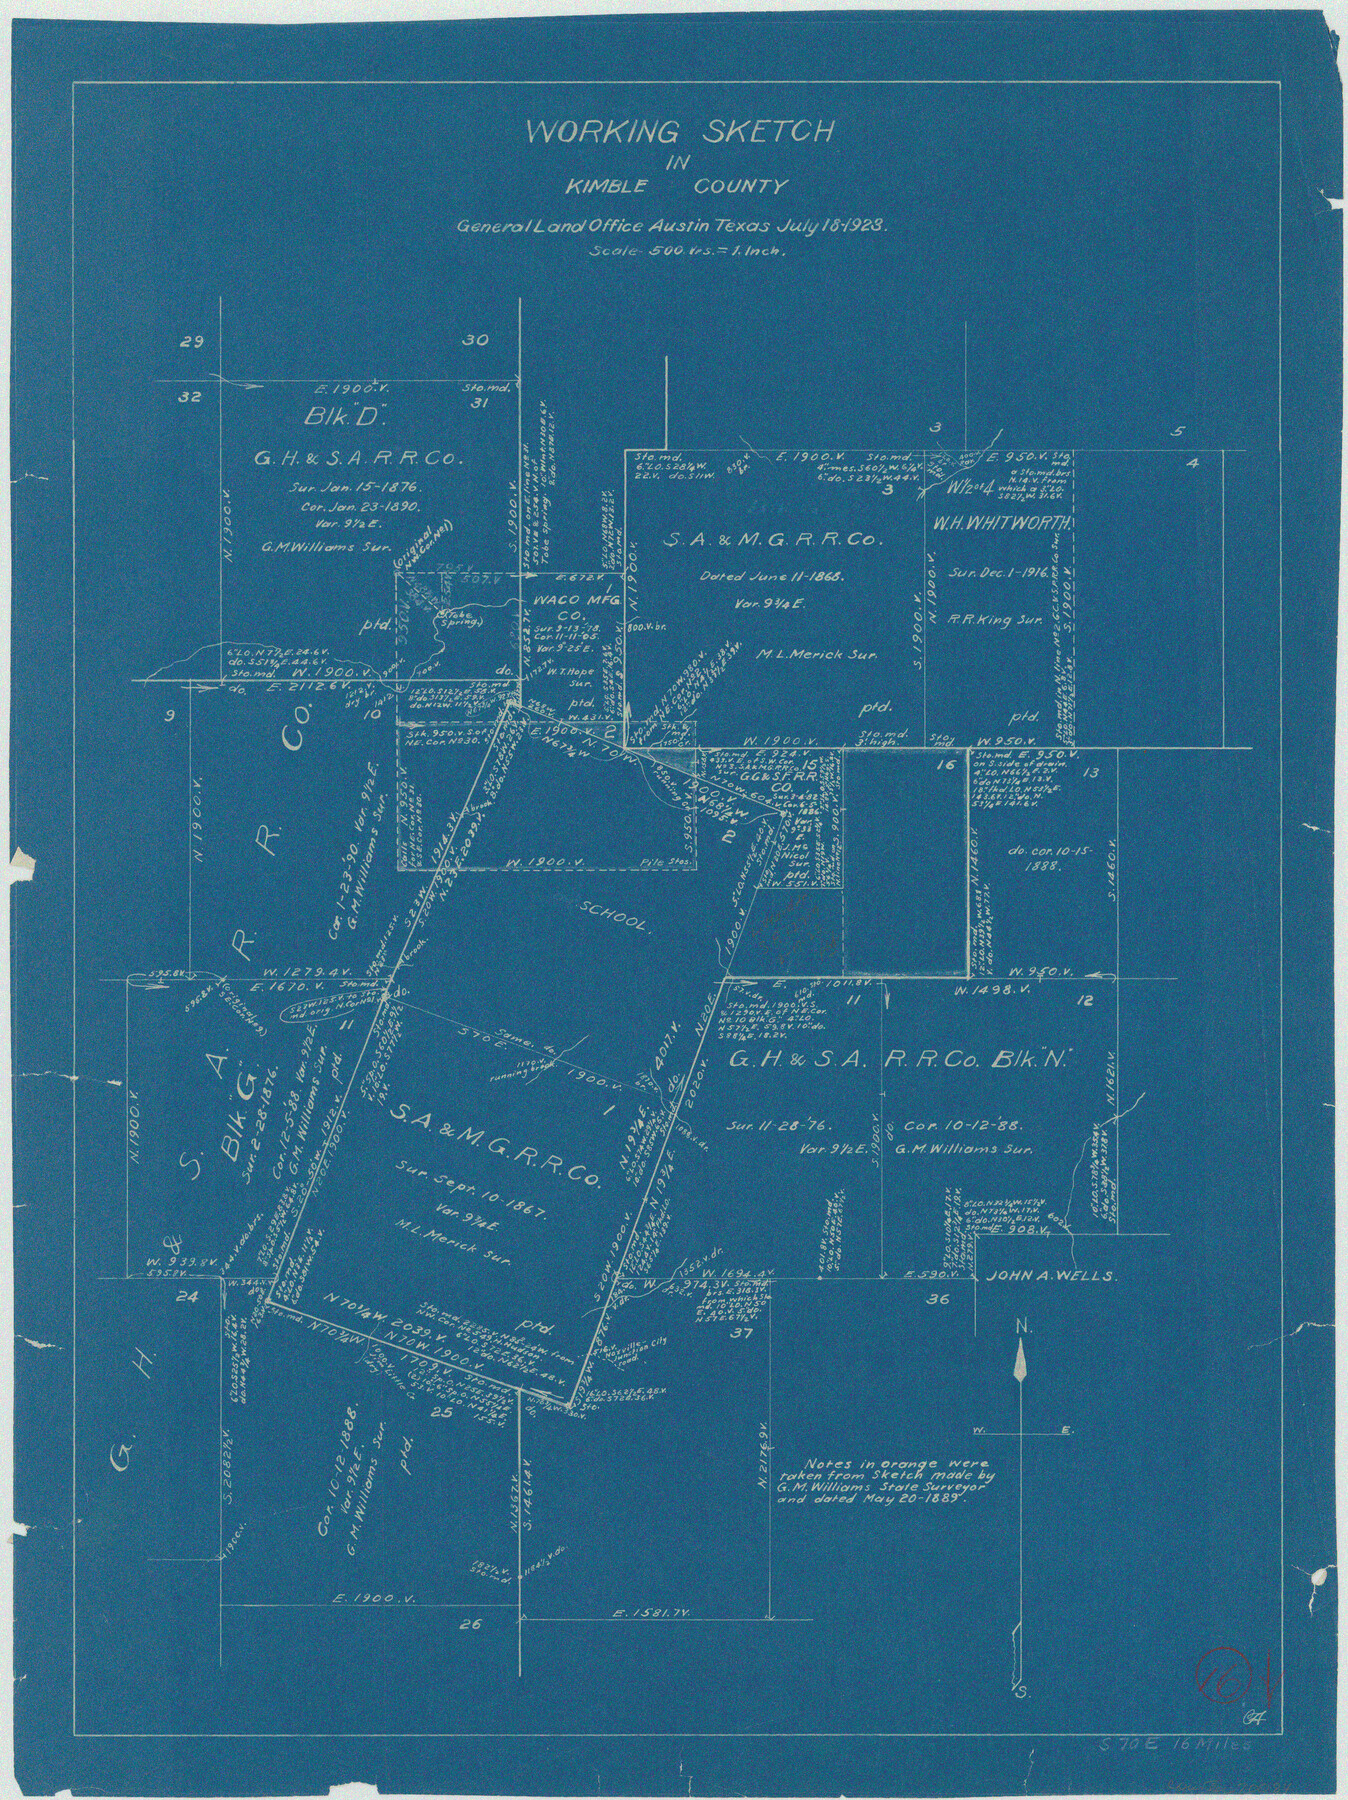 70084, Kimble County Working Sketch 16, General Map Collection